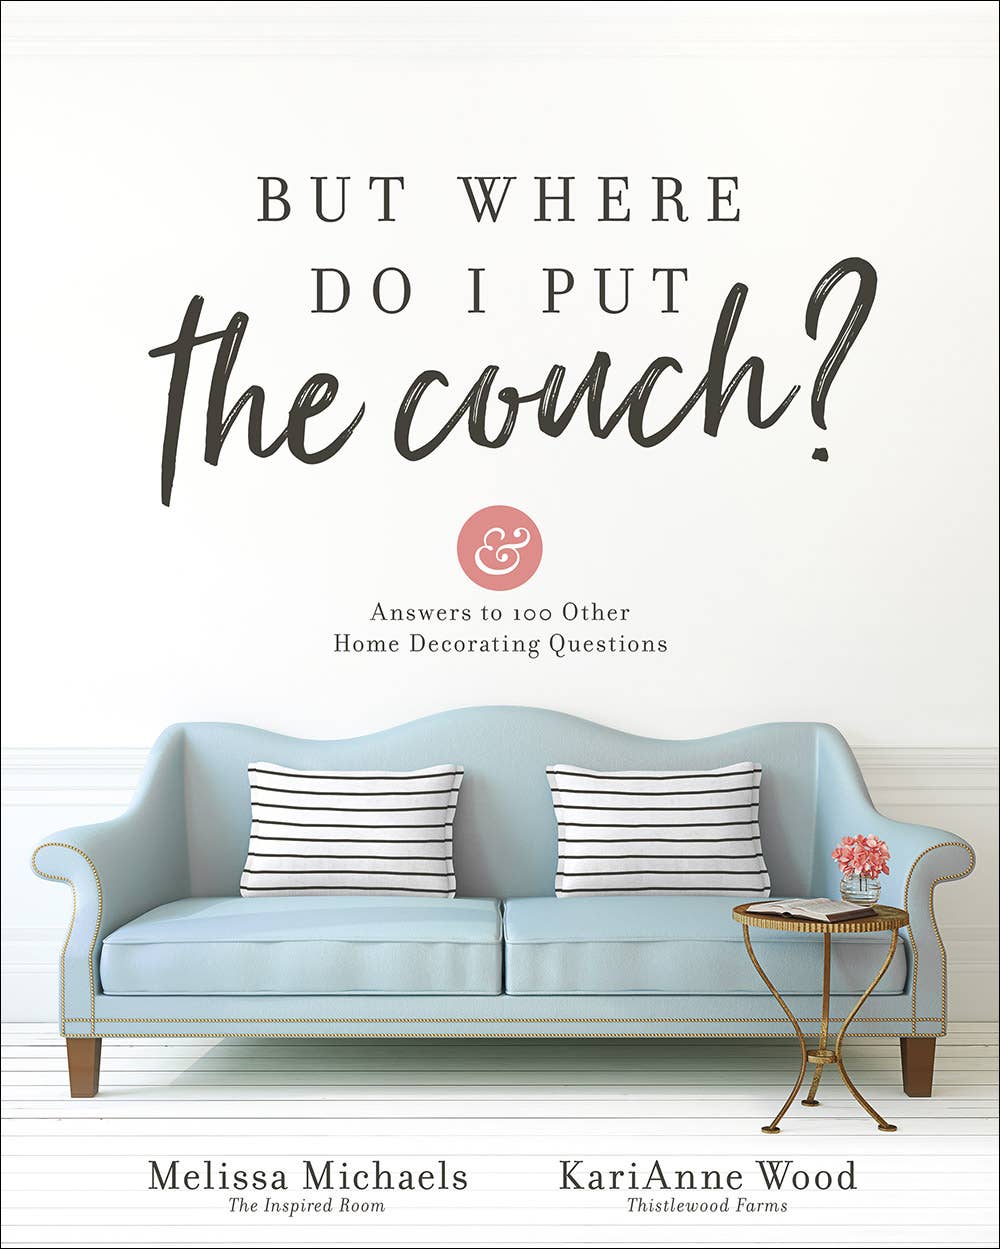 But Where Do I Put the Couch?, Book - Home